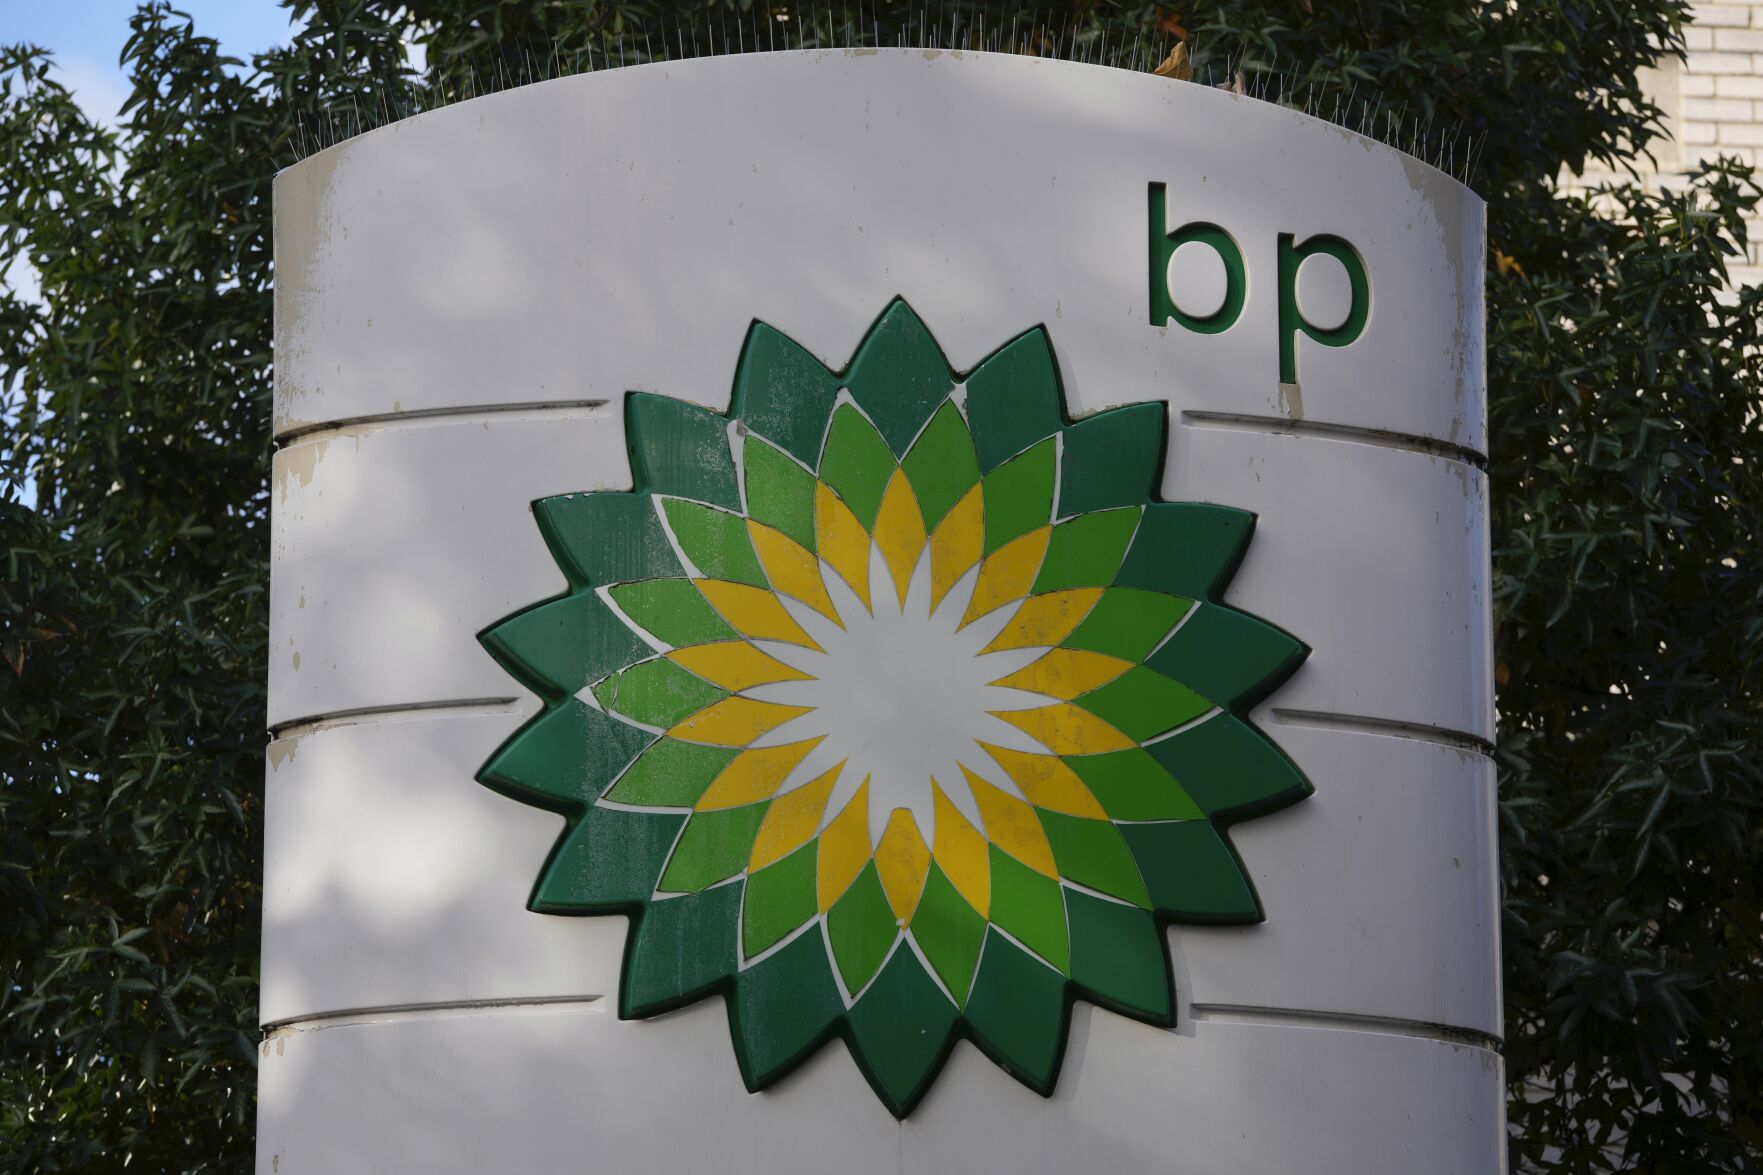 <p>FILE - A logo of BP is seen at a gas station in London, on Nov. 1, 2022. British energy company BP reported record annual earnings on Tuesday, Feb. 7, 2023 amid growing calls for the U.K. government to boost taxes on companies profiting from the high price of oil and natural gas after Russia’s invasion of Ukraine. (AP Photo/Kin Cheung, File)</p>   PHOTO CREDIT: Kin Cheung 